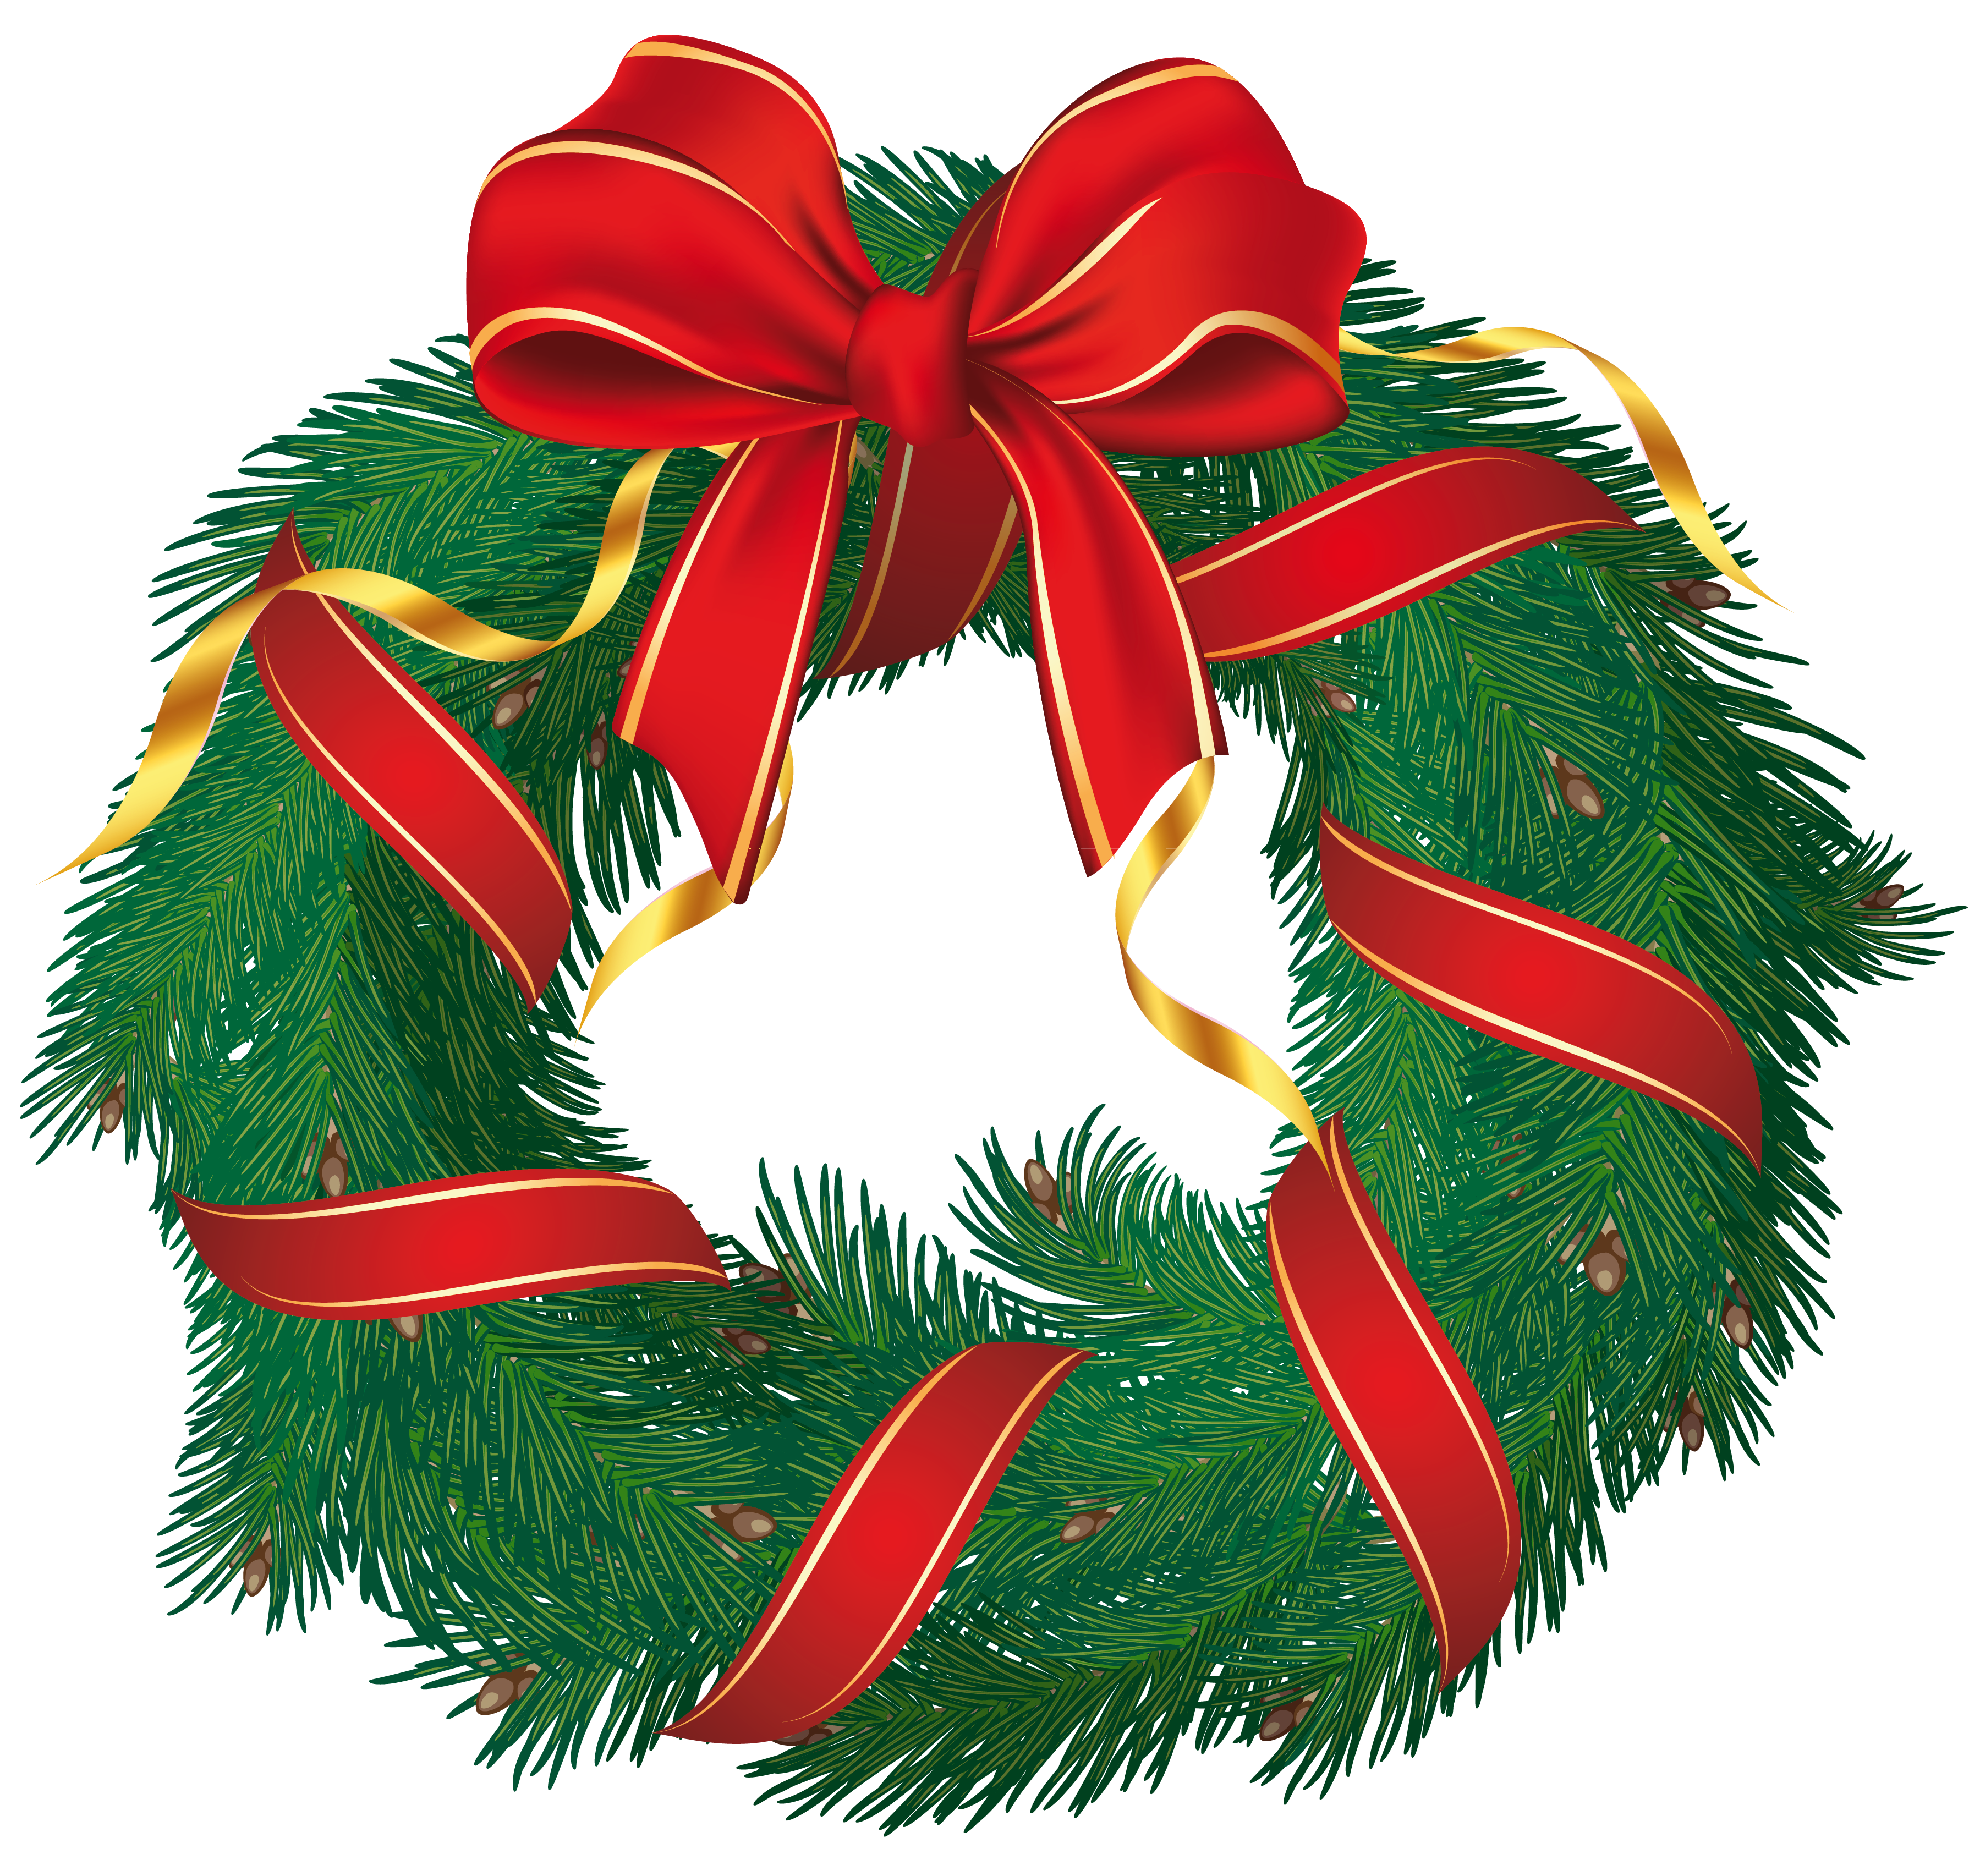 Wreath clipart #7, Download drawings